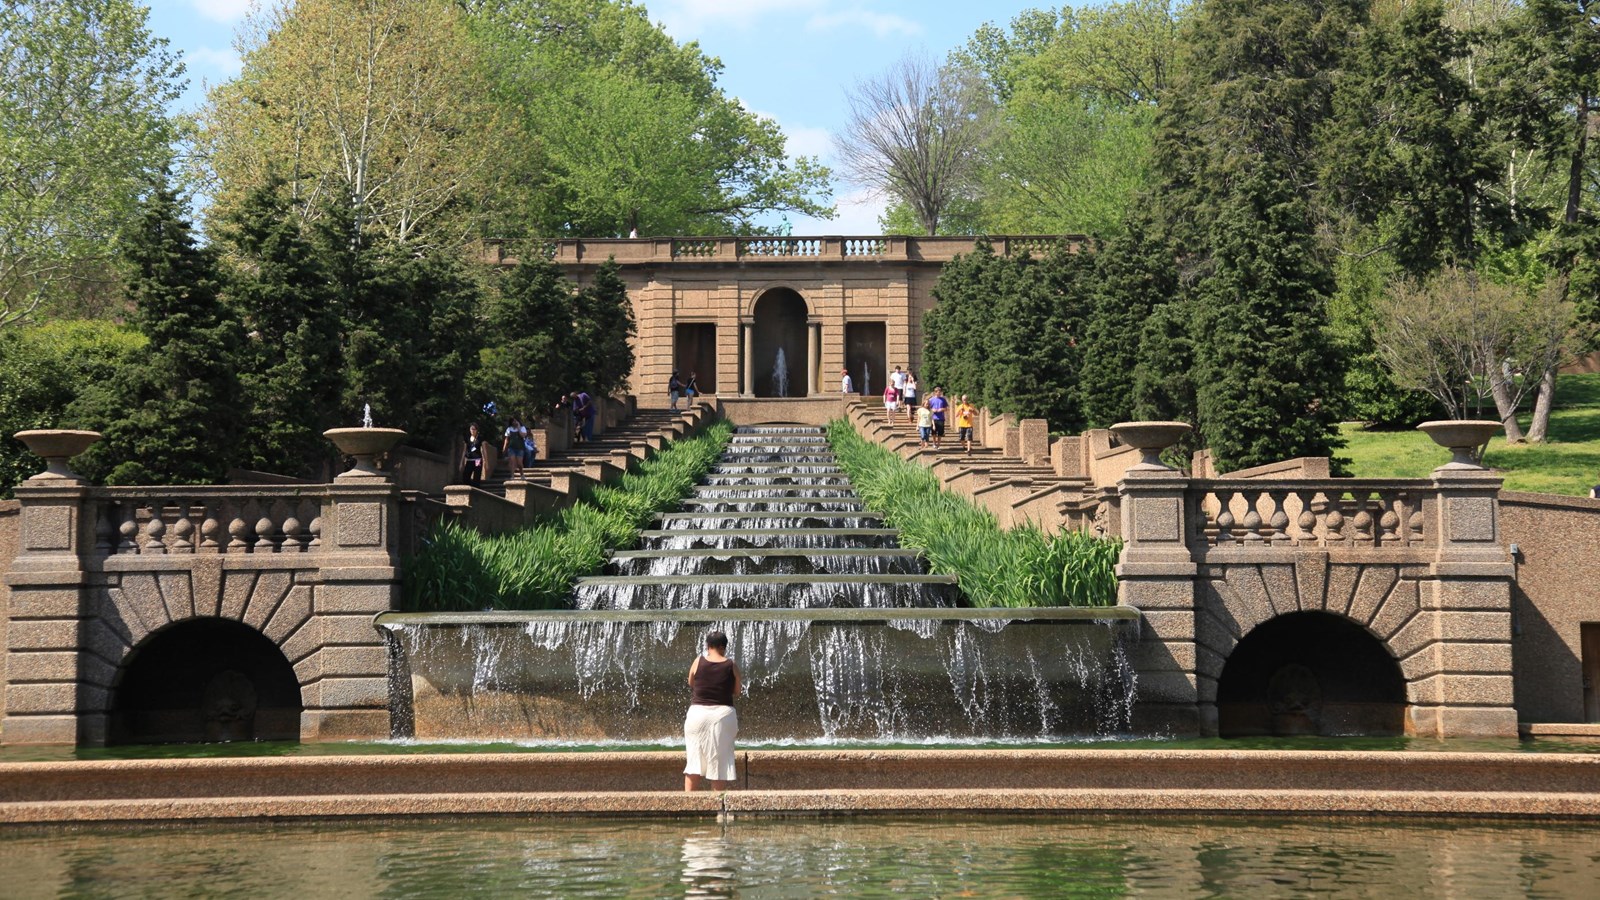 Visitors by the fountains at Meridian Hill Park.